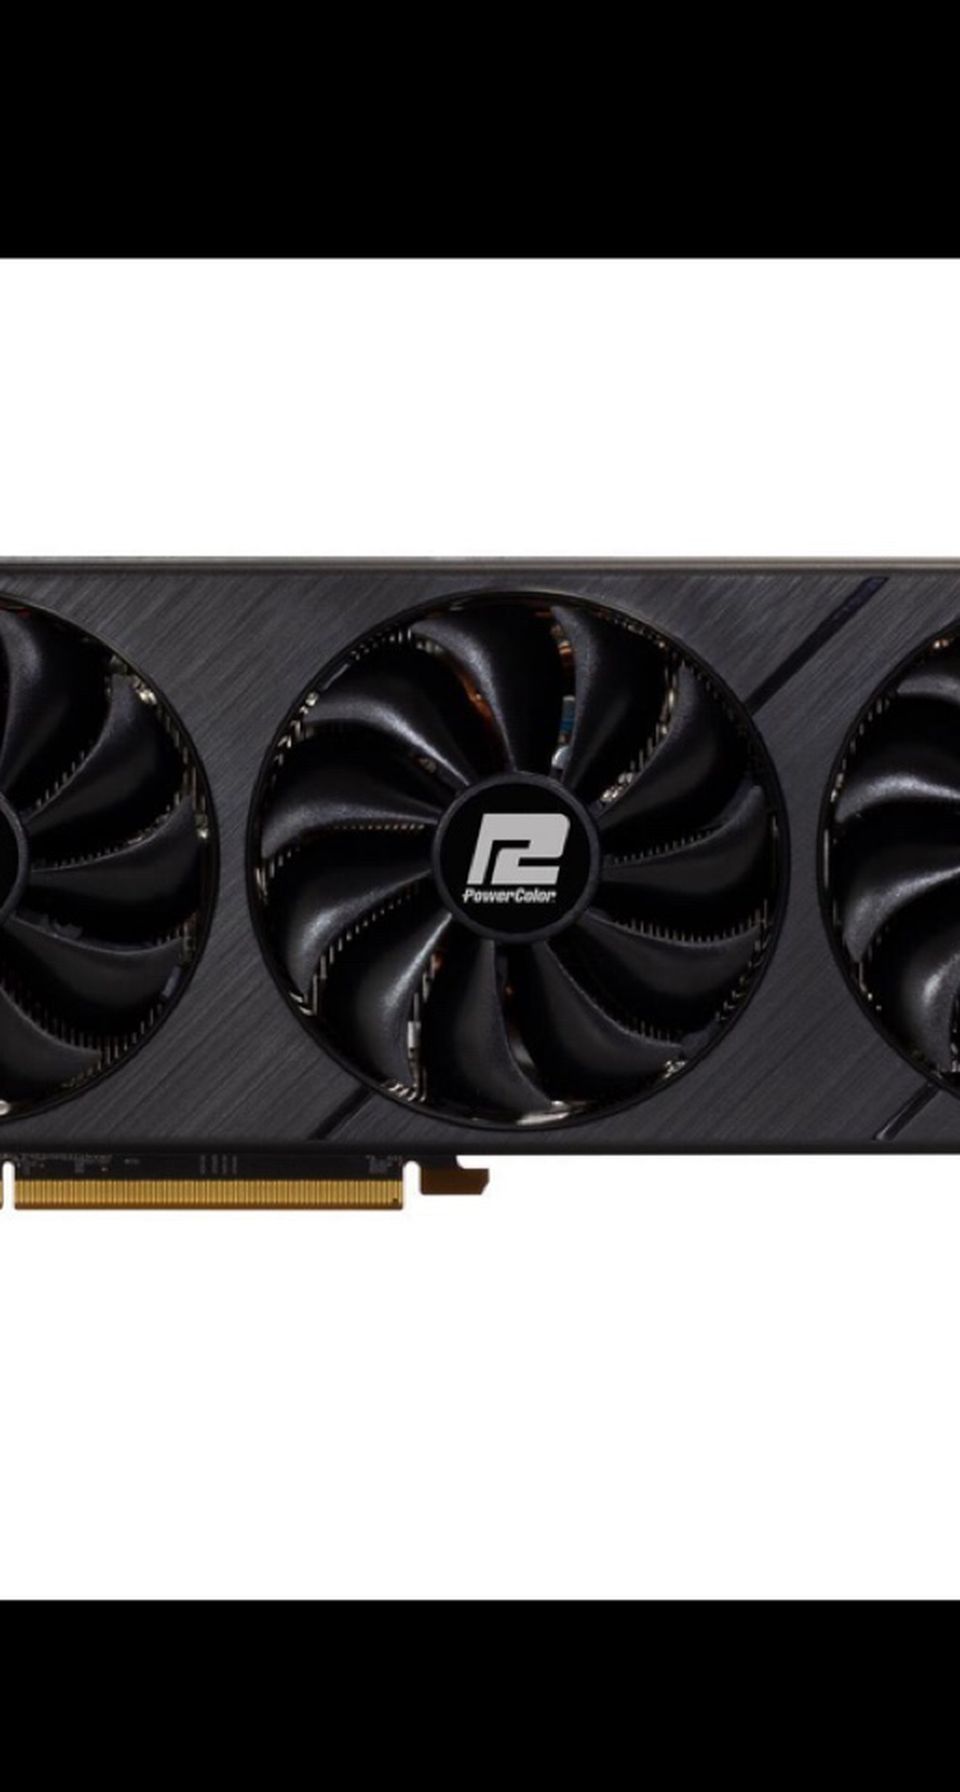 PowerColor Fighter AMD Radeon RX 6800 Gaming Graphics card with 16GB GDDR6 Memory